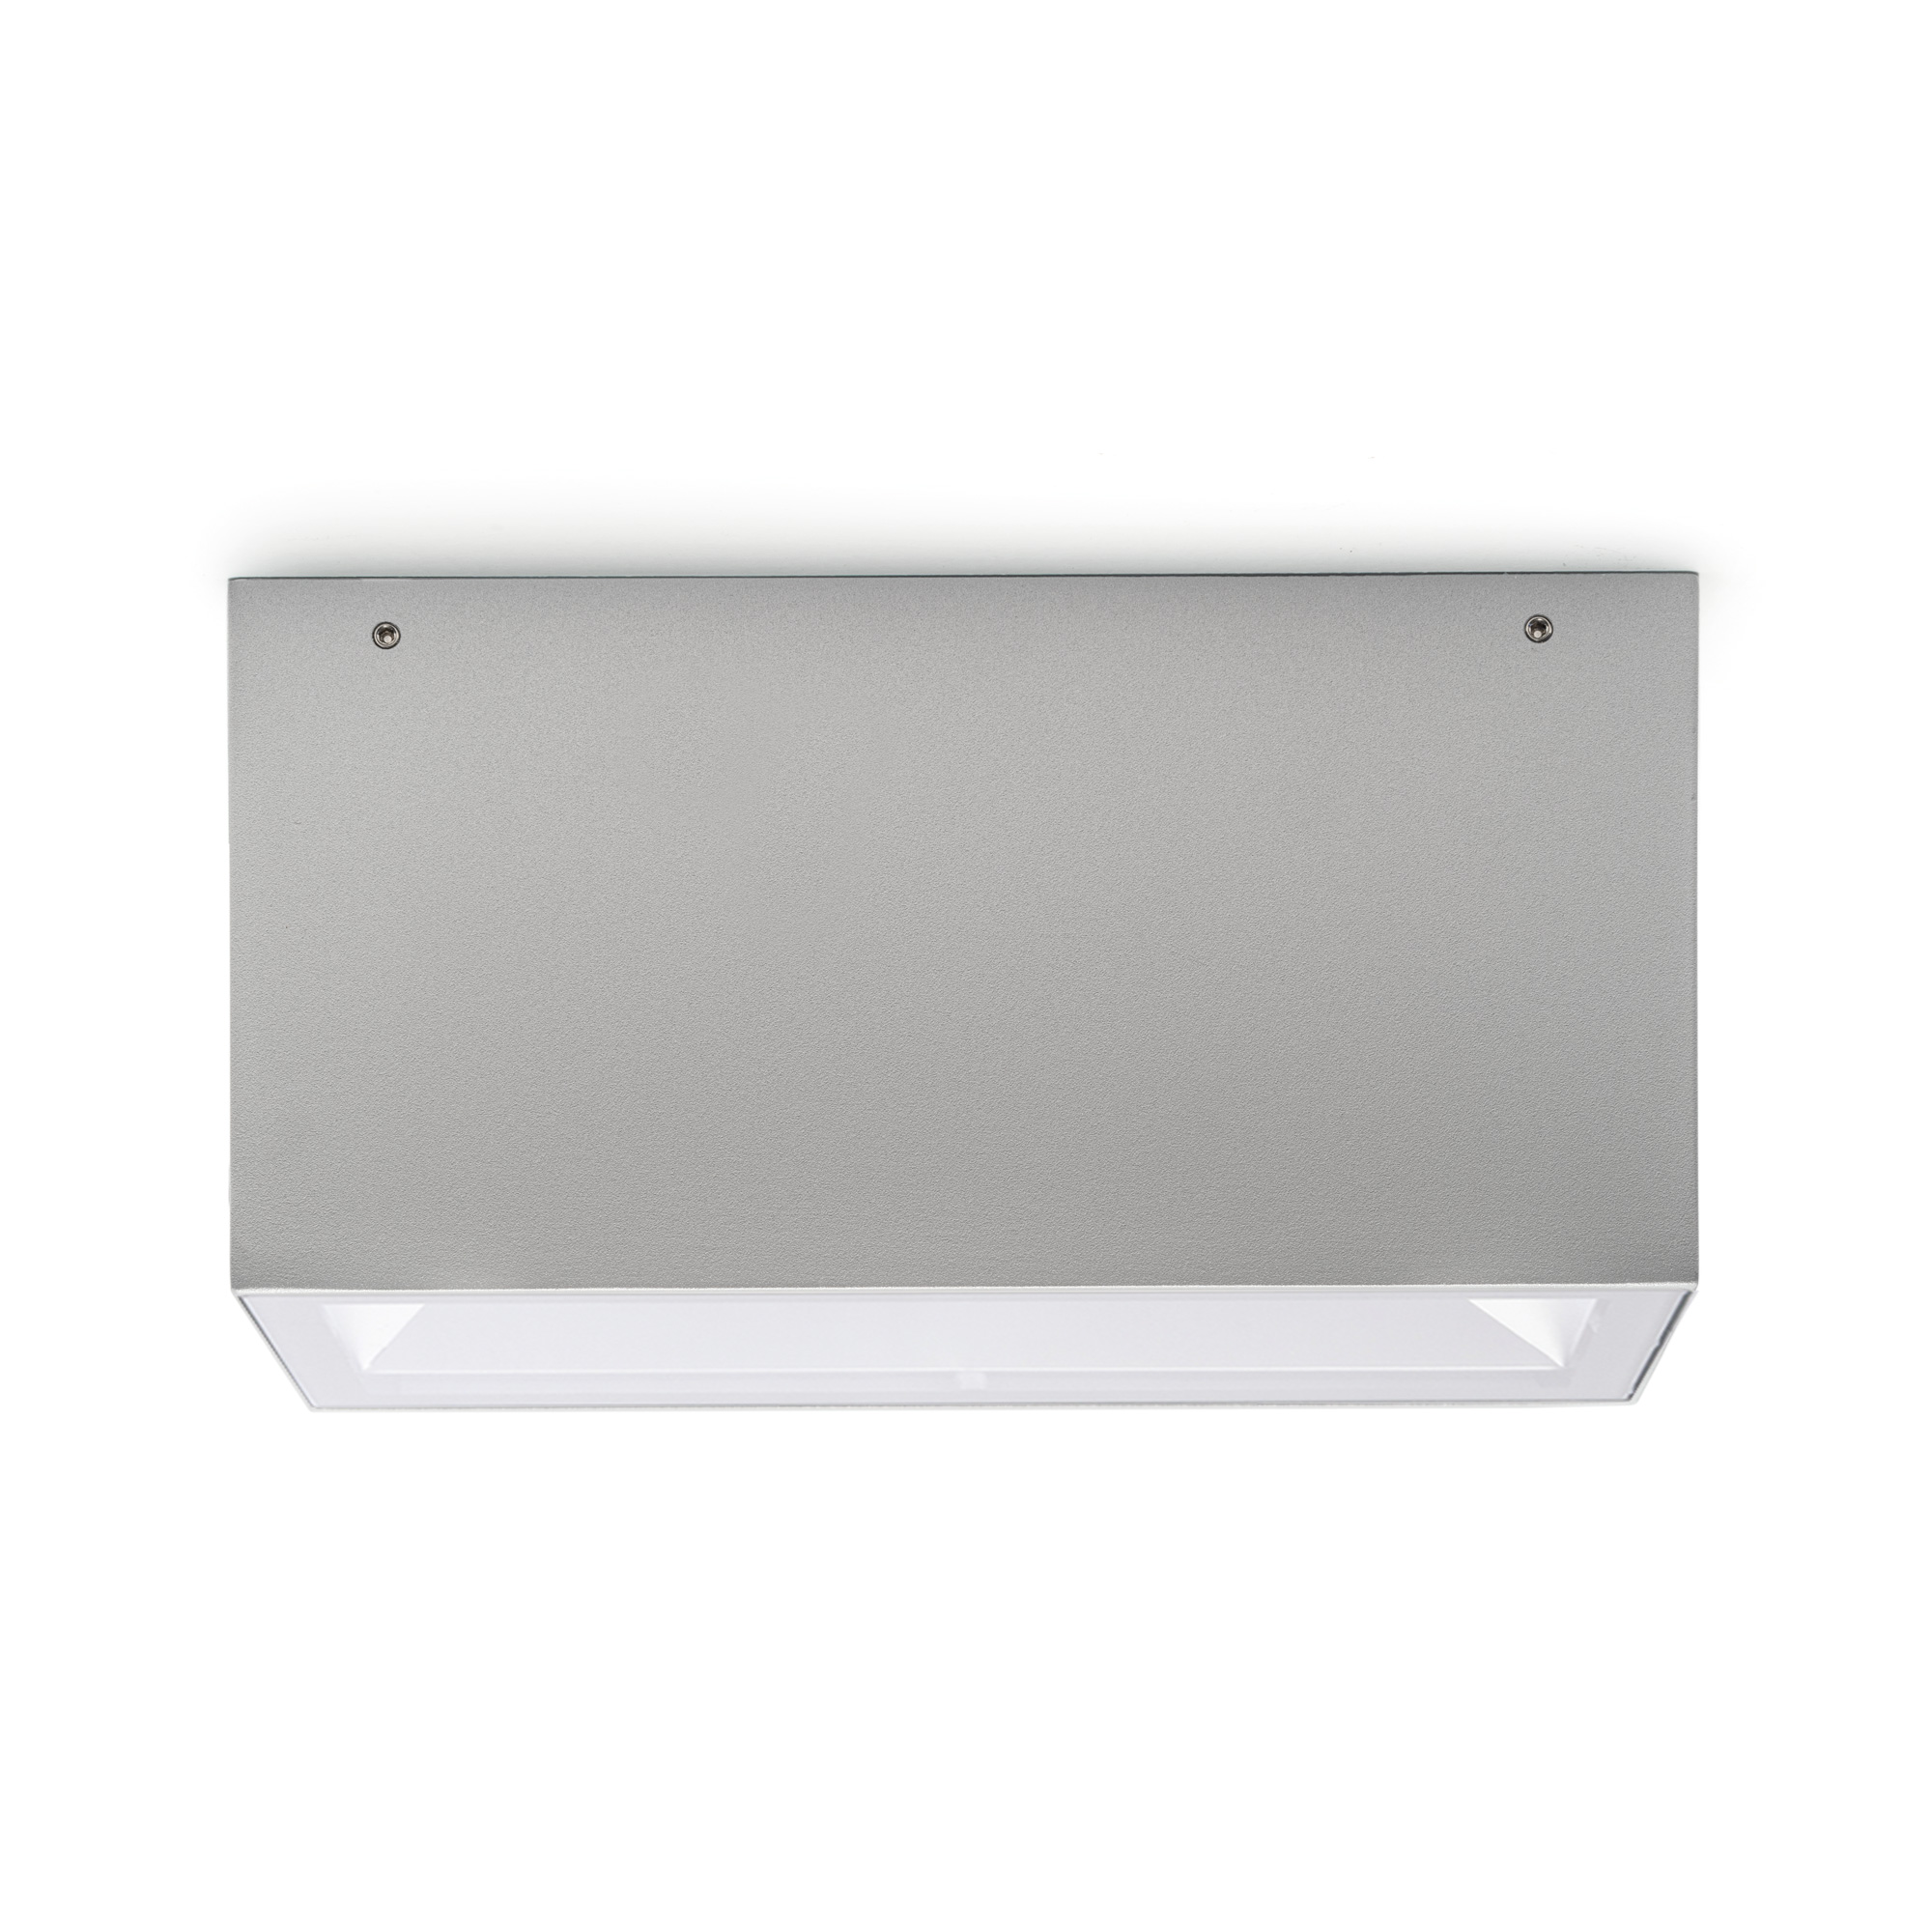 Special by Platek - Exterior surface ceiling mount in classic rectangular shape